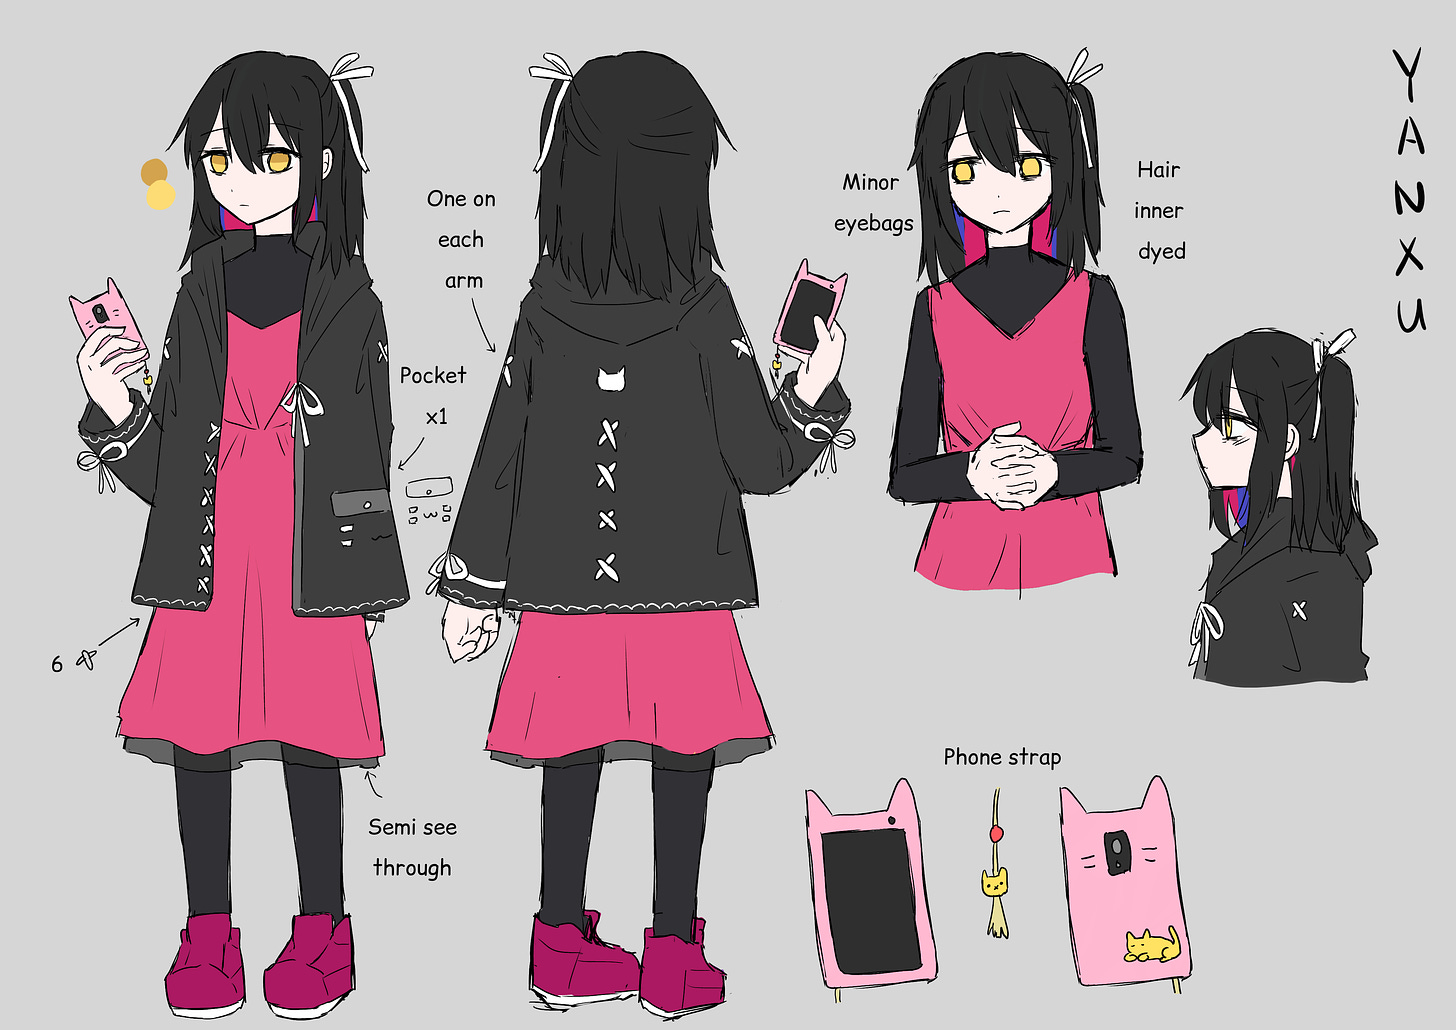 character sheet for yanxu: a girl with shoulder length black hair, side tail on her left. The back of her hair is dyed pink and indigo. she is wearing a black kitty hoodie decorated with white ribbons over a pink dress, black leggings. she is holding a pink cat shaped phone case